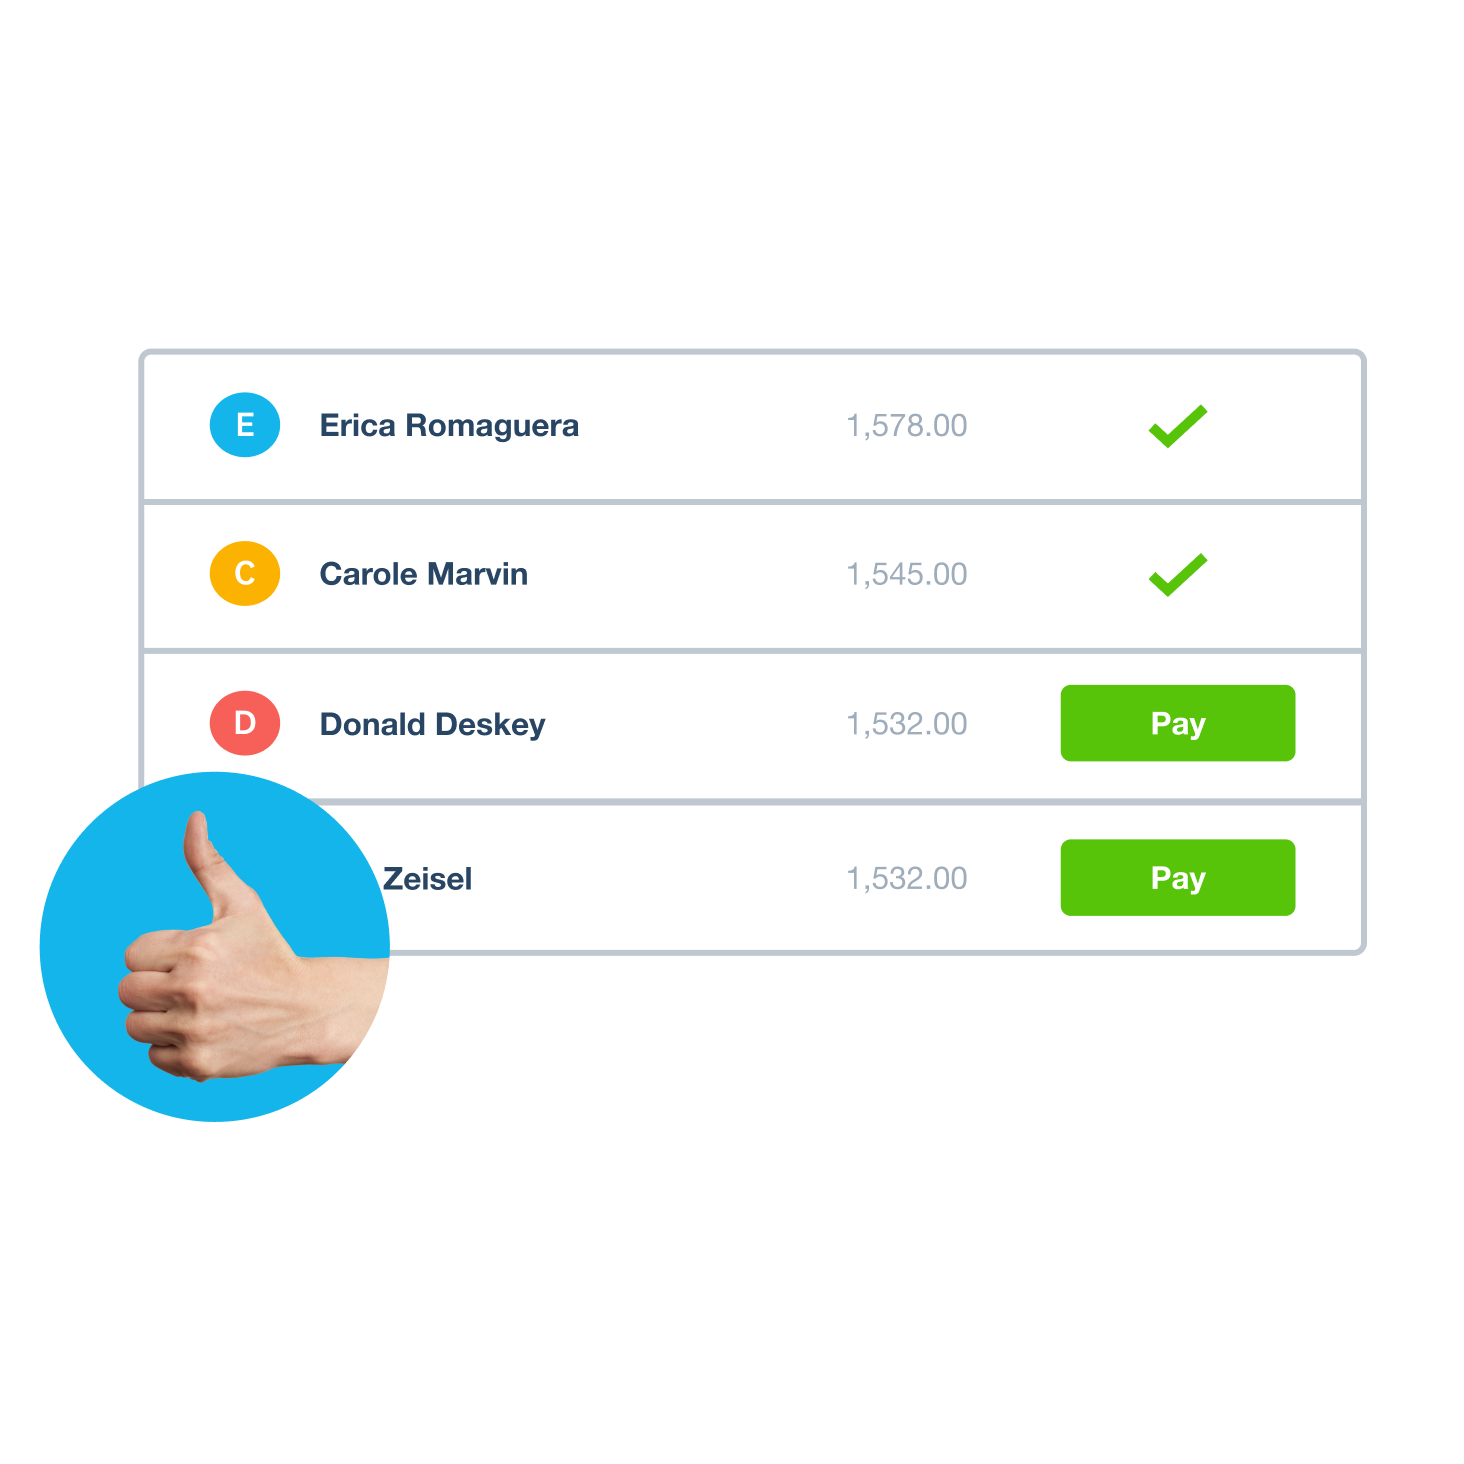 The payroll software in Xero shows which of a non-profit’s employees to pay in this pay run.